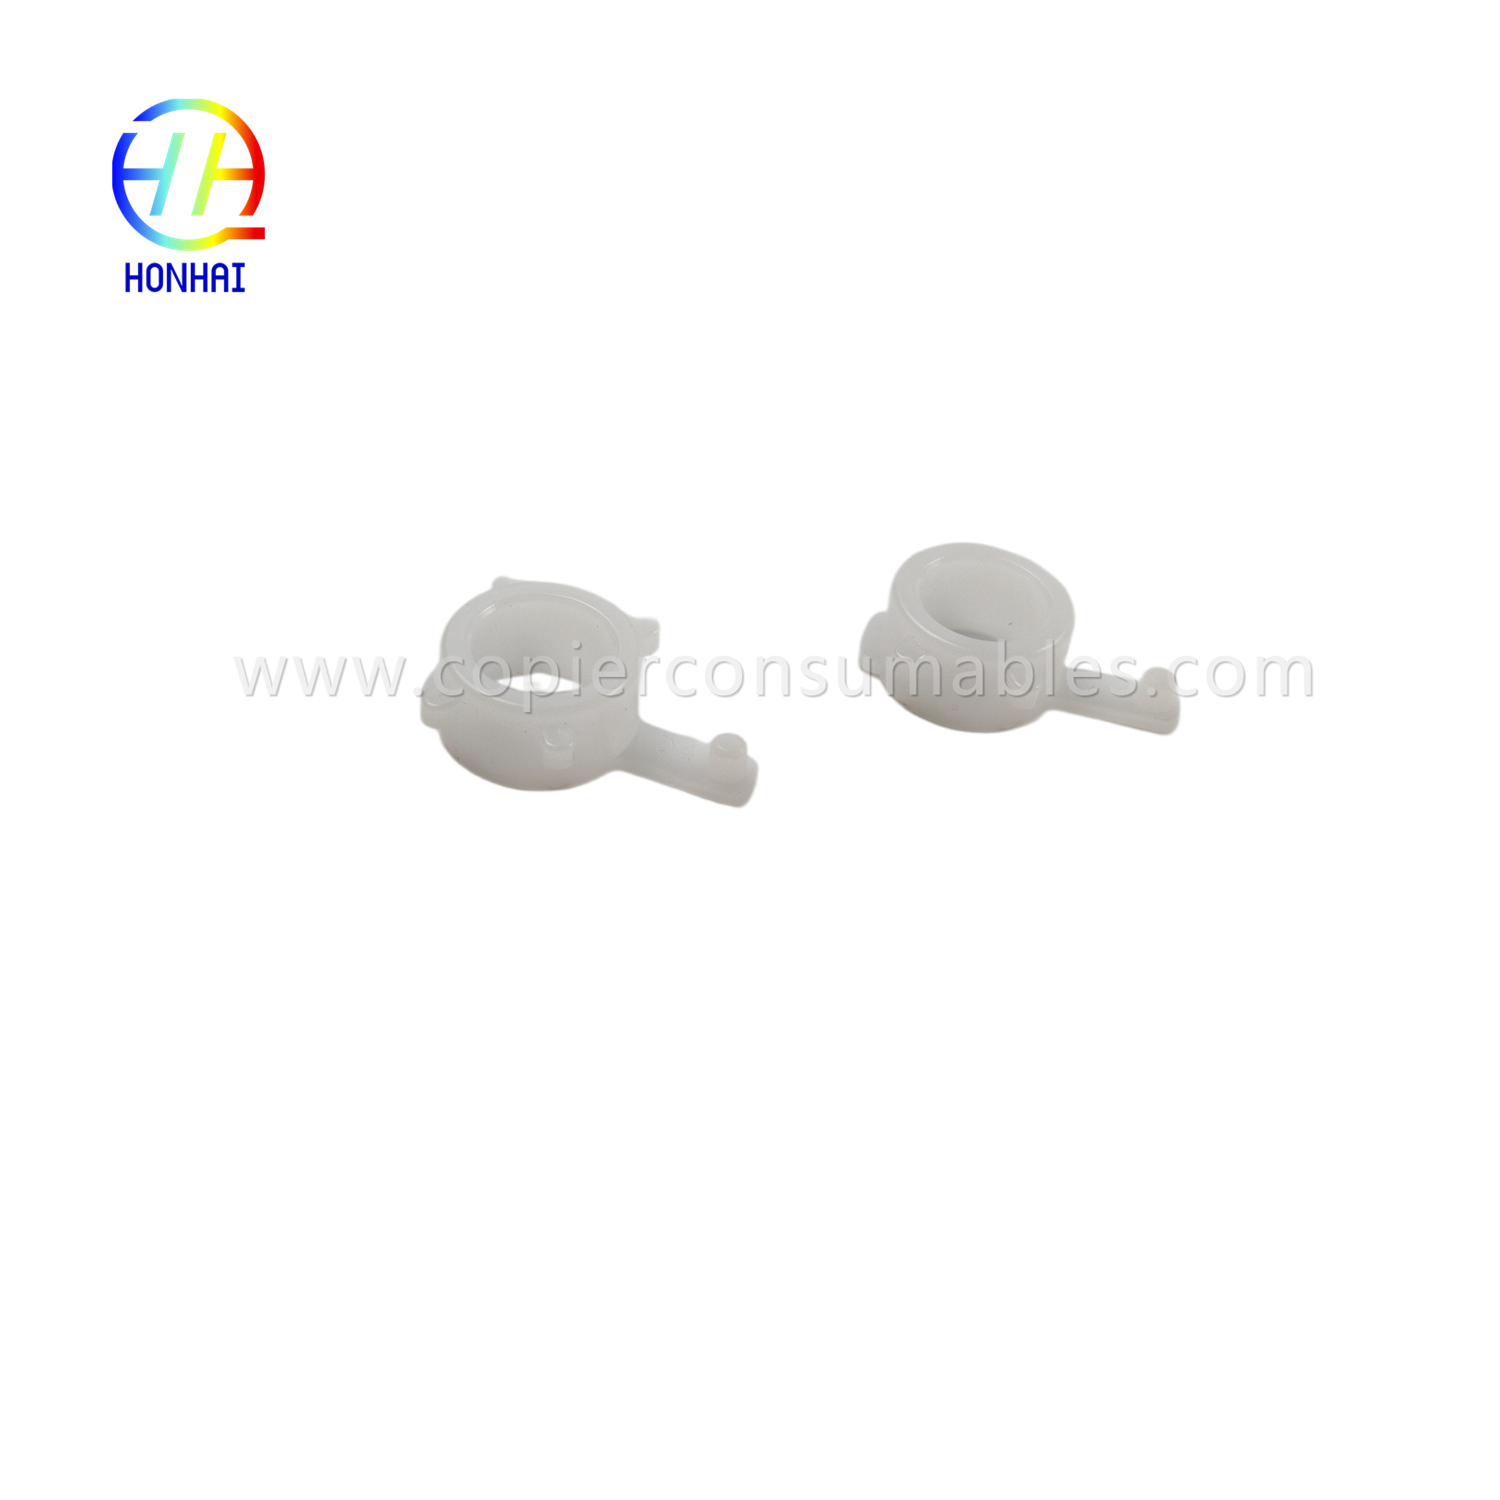 https://c585.goodao.net/delivery-roller-busing-for-hp-2035-2055-2015-1320-rc2-6237-000-rl2-6229-oem-product/